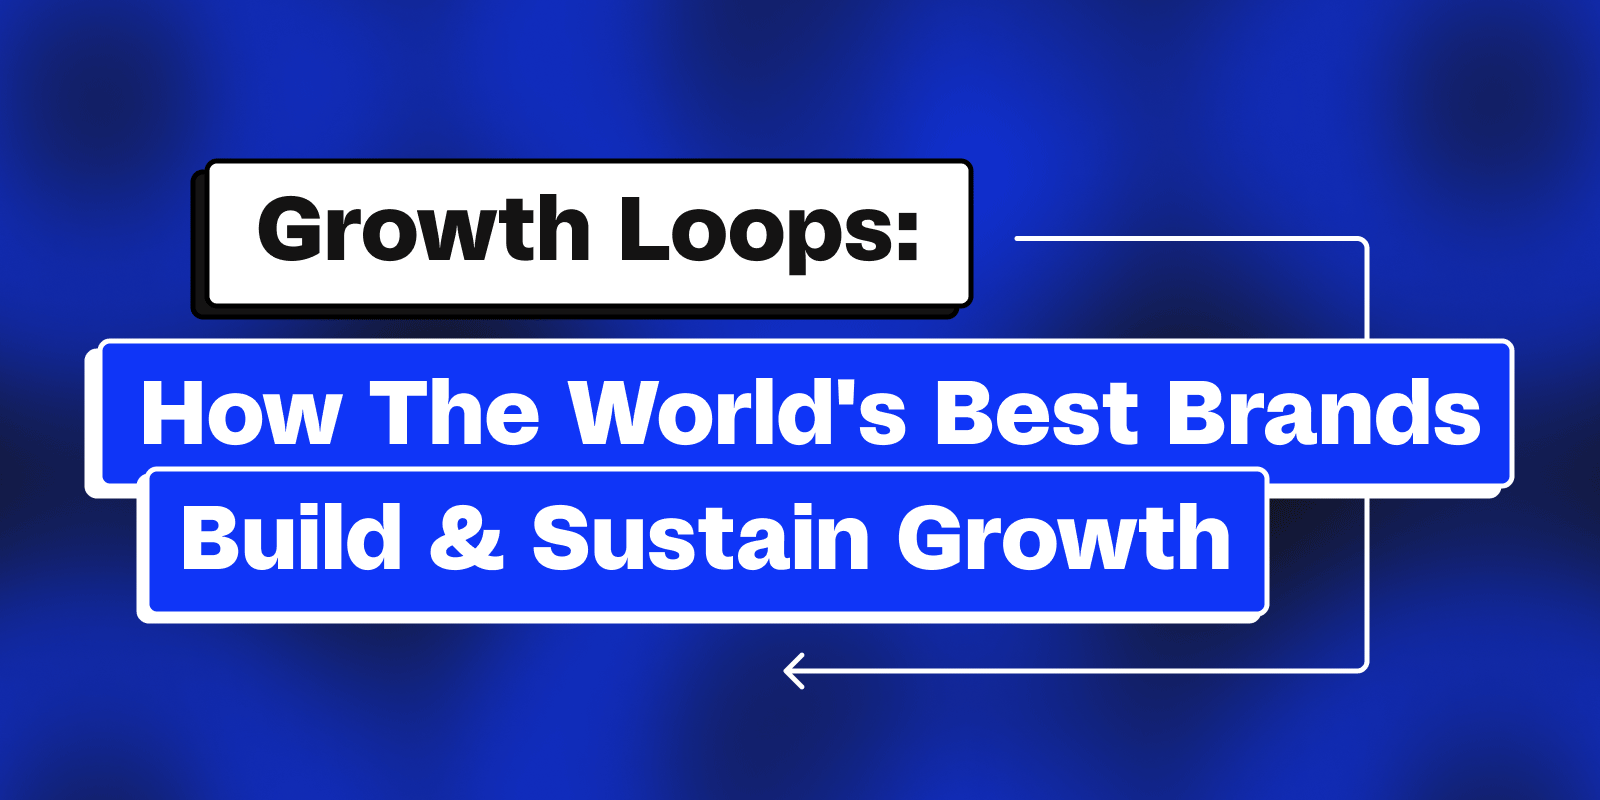 Growth Loops: How the World's Best Brands Build & Sustain Growth